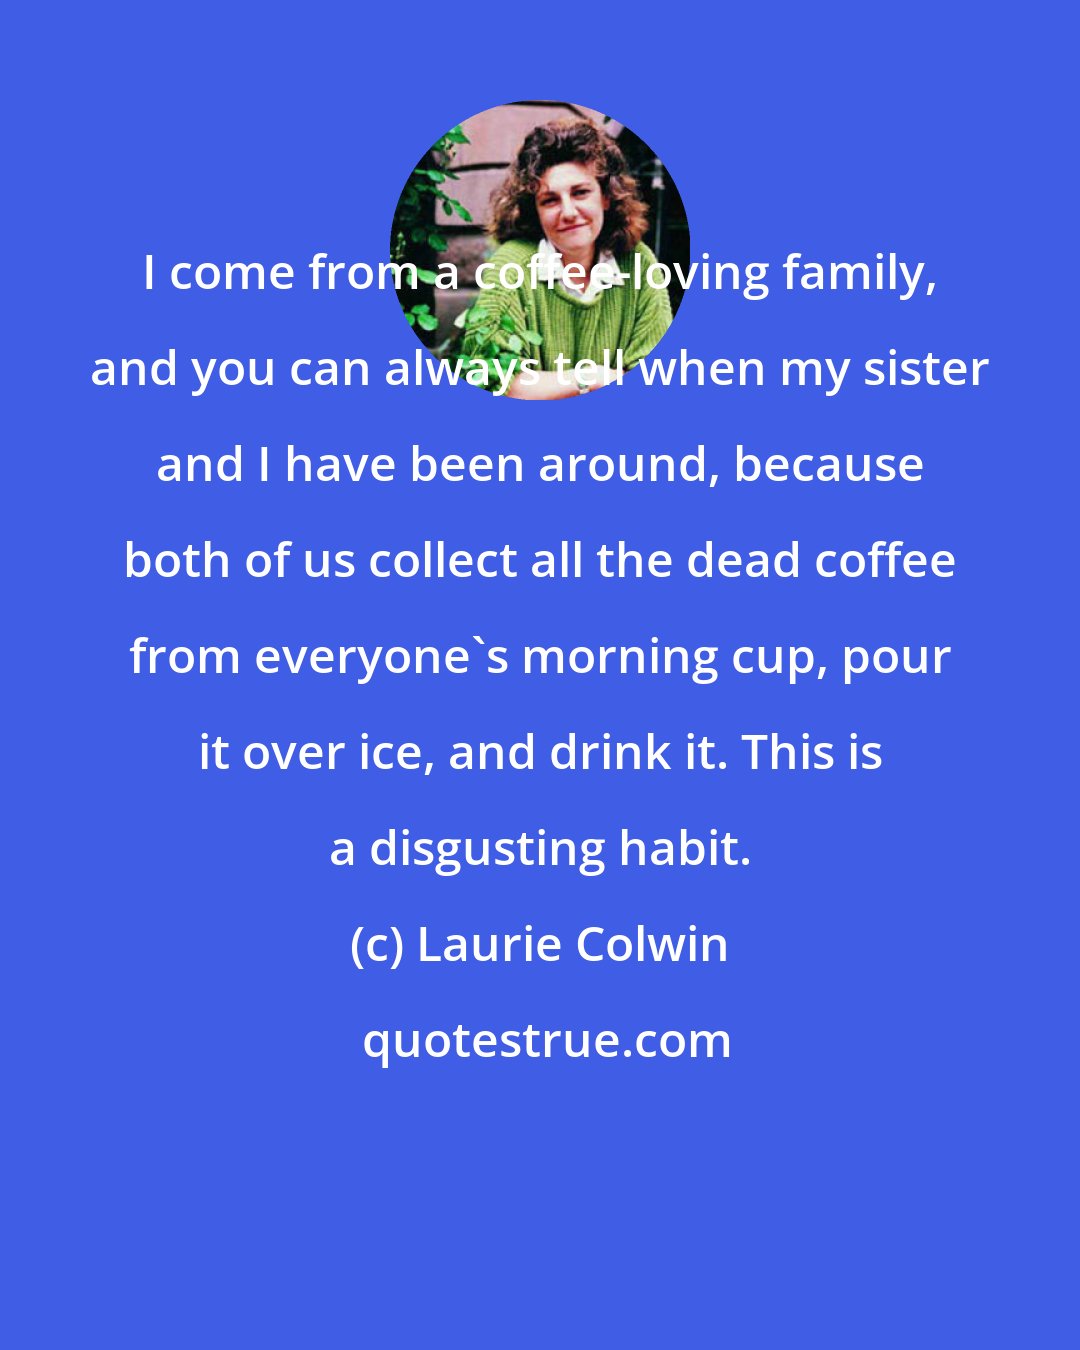 Laurie Colwin: I come from a coffee-loving family, and you can always tell when my sister and I have been around, because both of us collect all the dead coffee from everyone's morning cup, pour it over ice, and drink it. This is a disgusting habit.